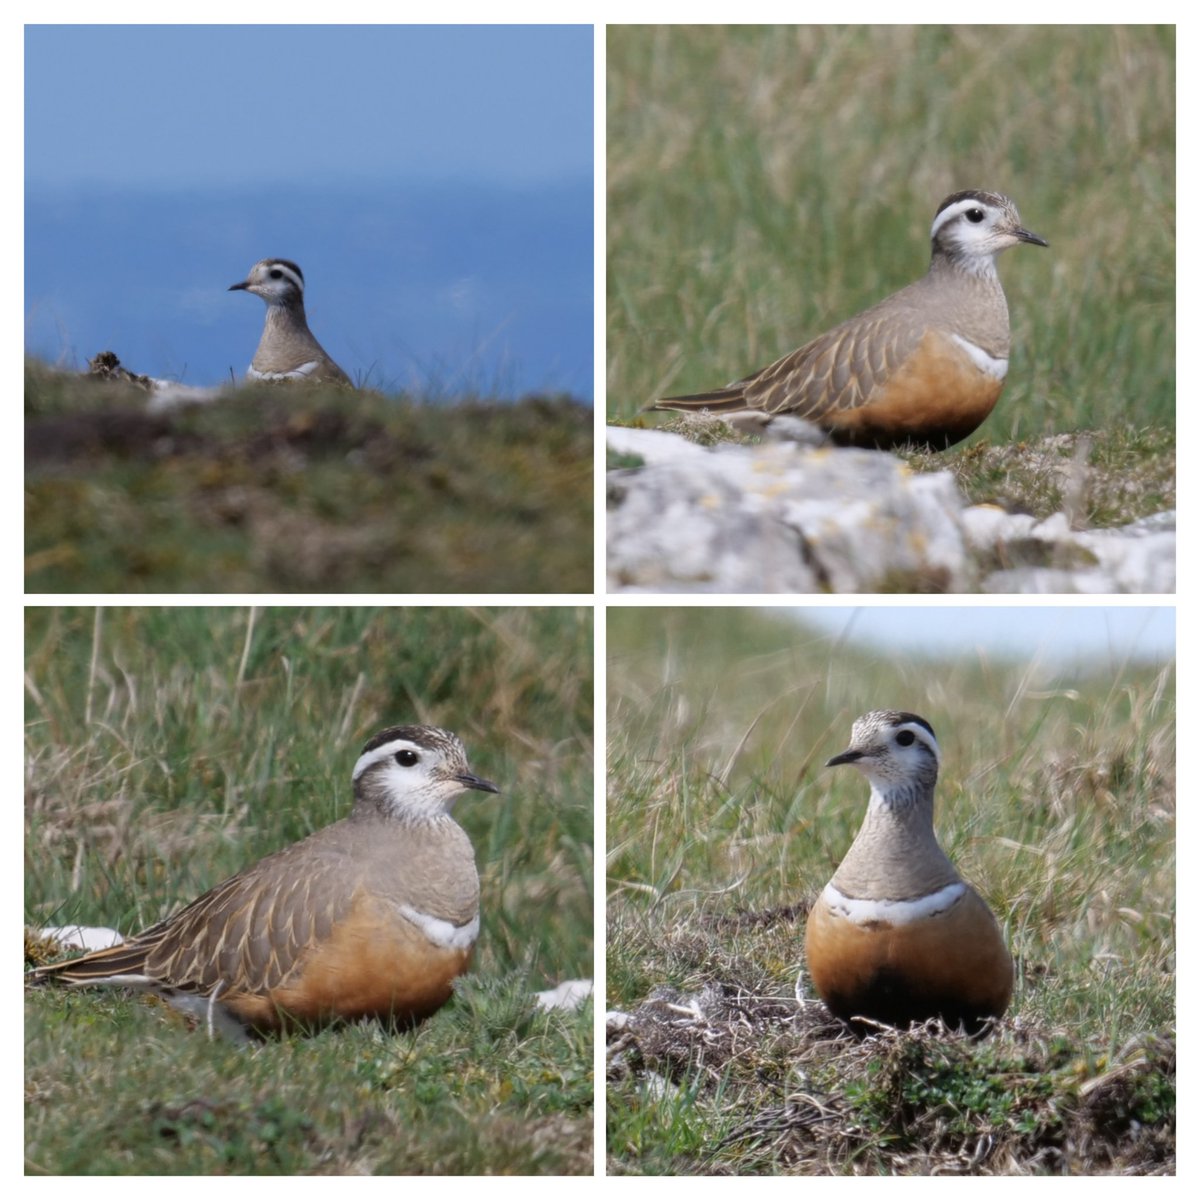 Close encounters with this Dotterel on the Great Orme, Nth Wales today. Stunning bird under the blue skies. #walesbirding #greatorme